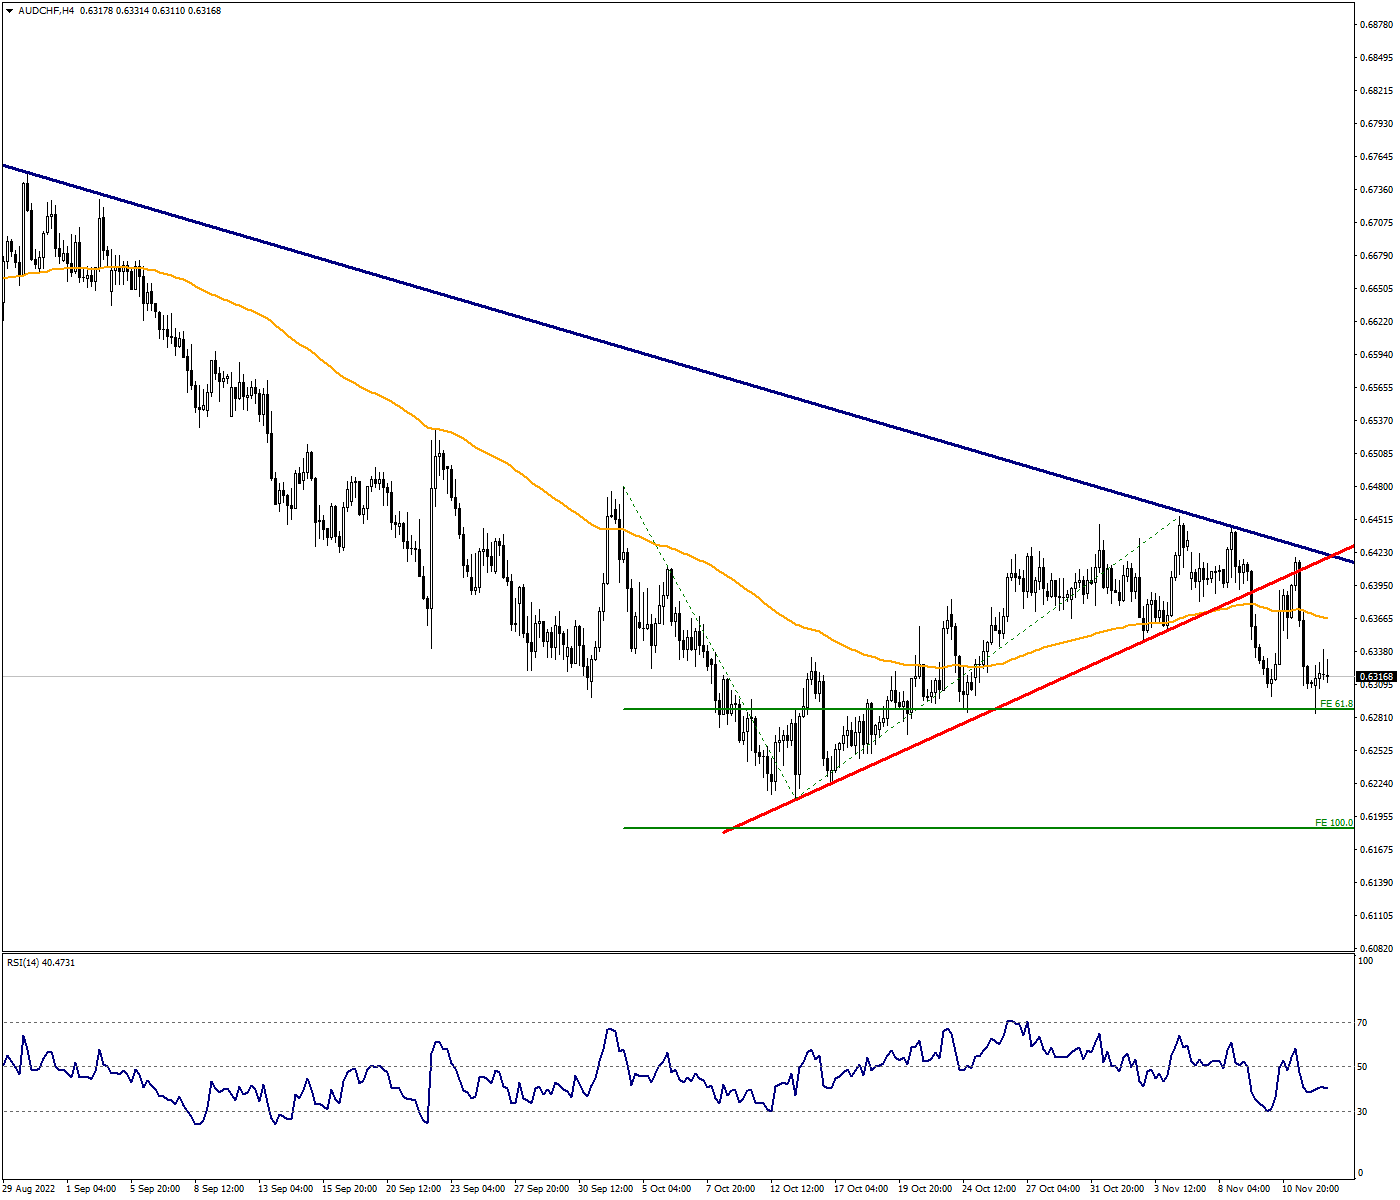 AUDCHF Confirms Downtrend